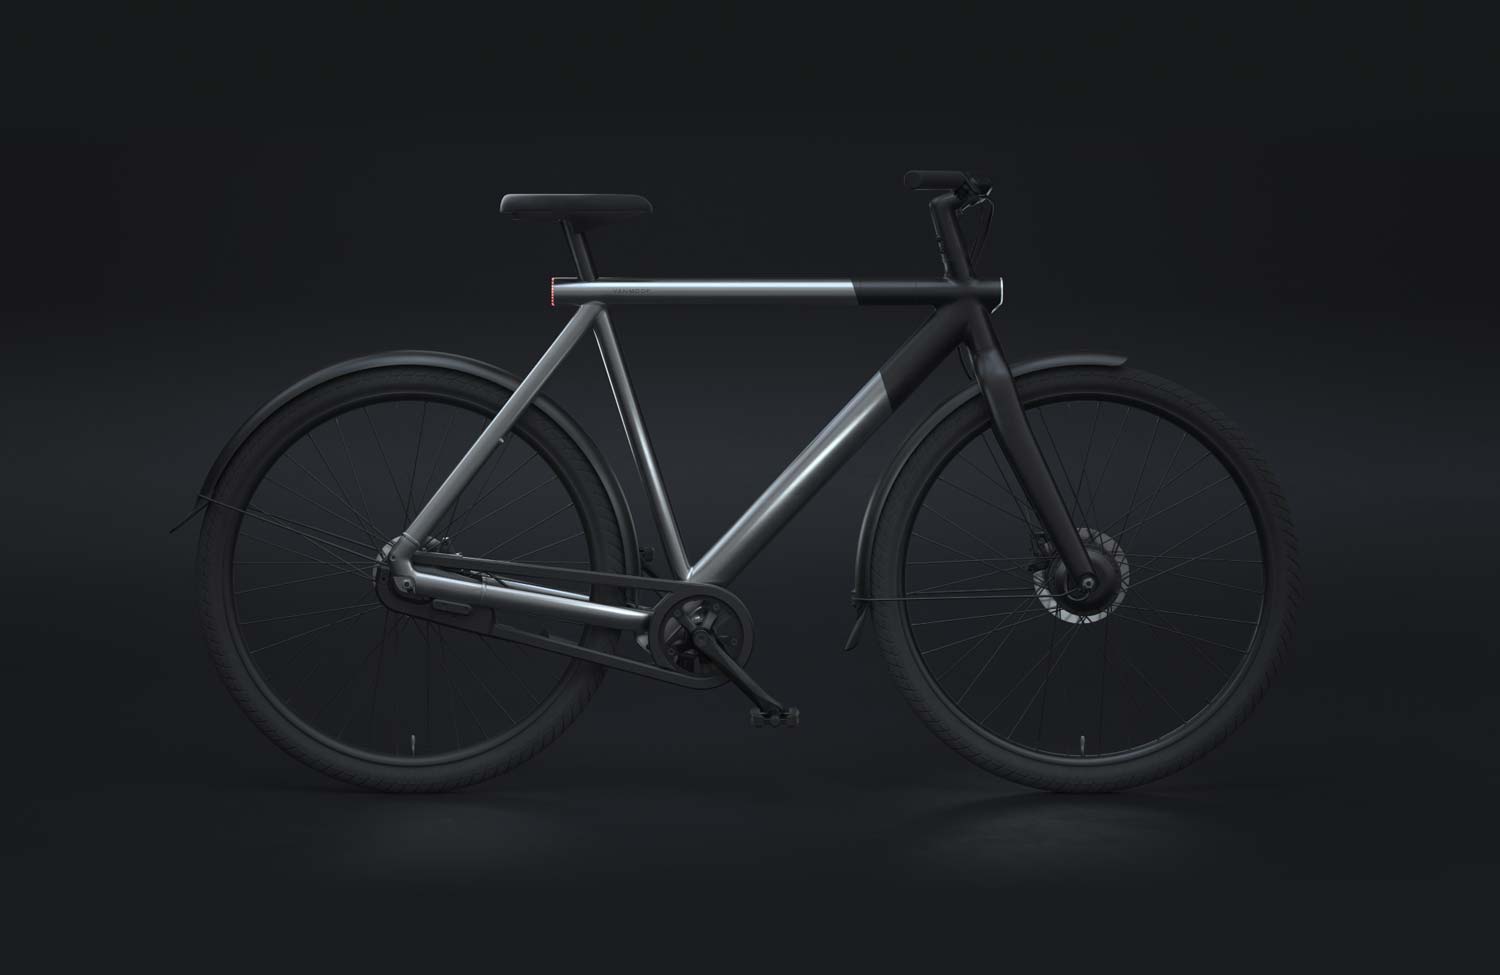 Limited Edition: the VanMoof S3 Aluminum